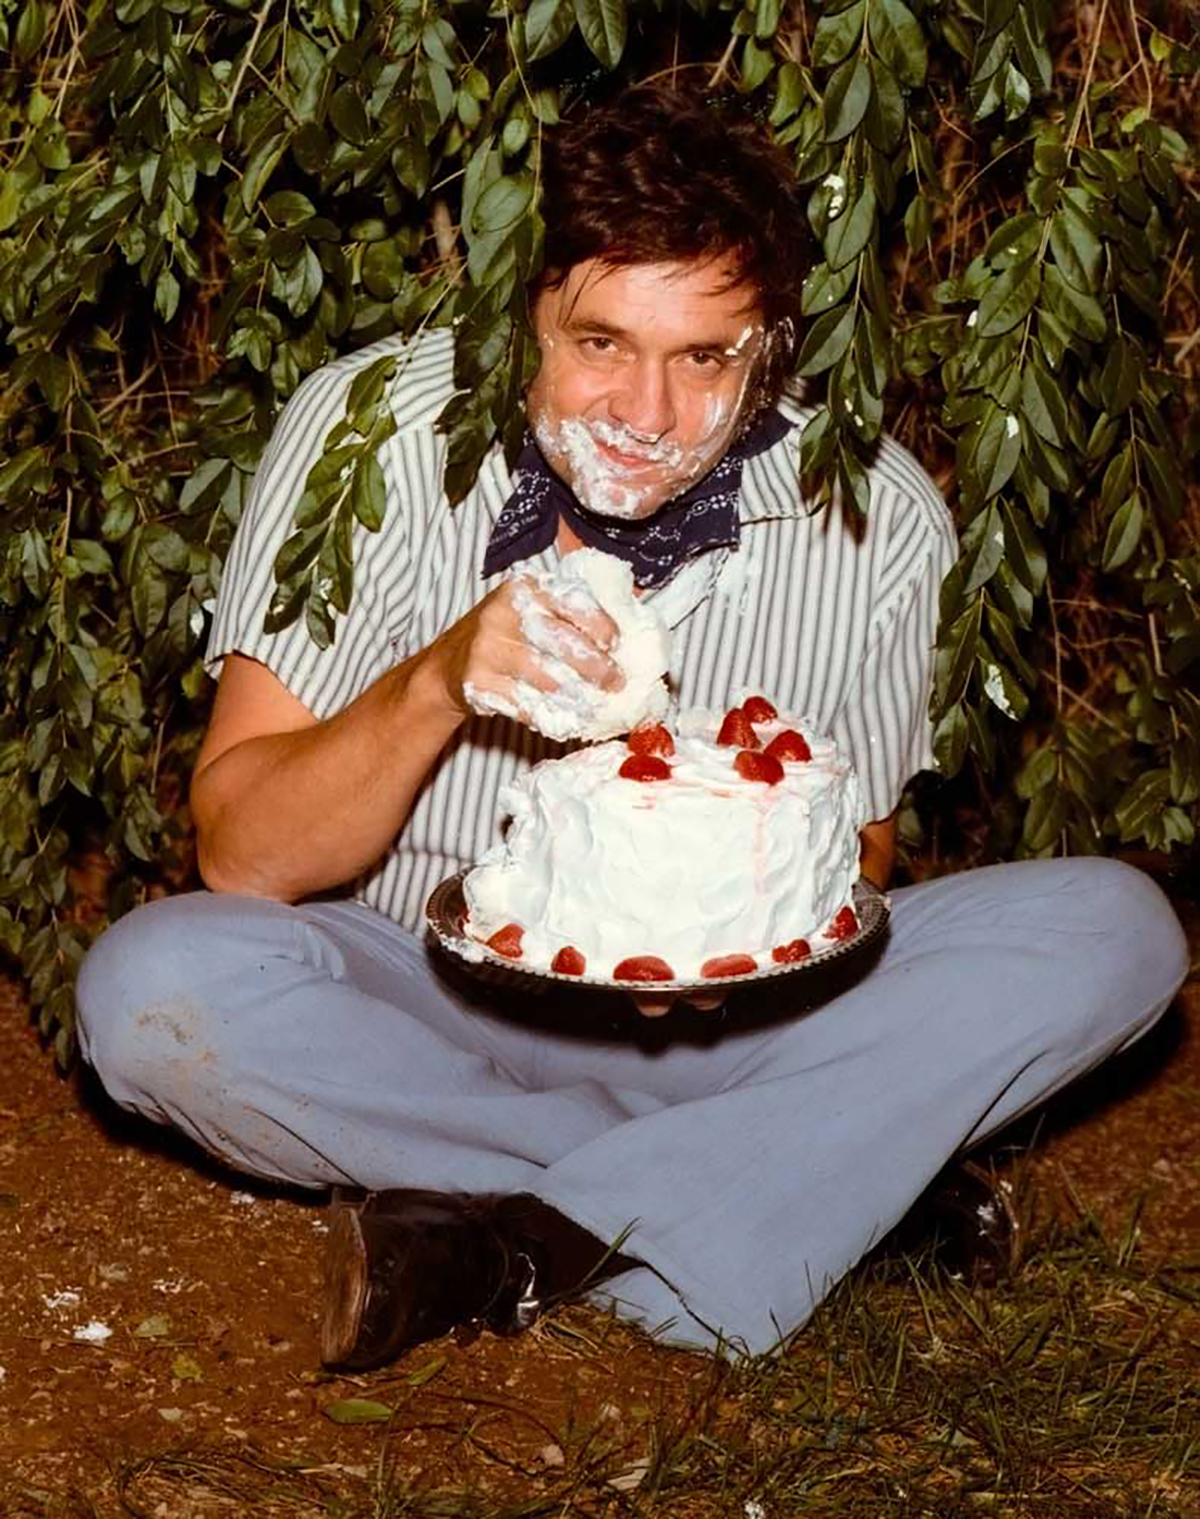 Johnny Cash eating a cake in the early 1970s.